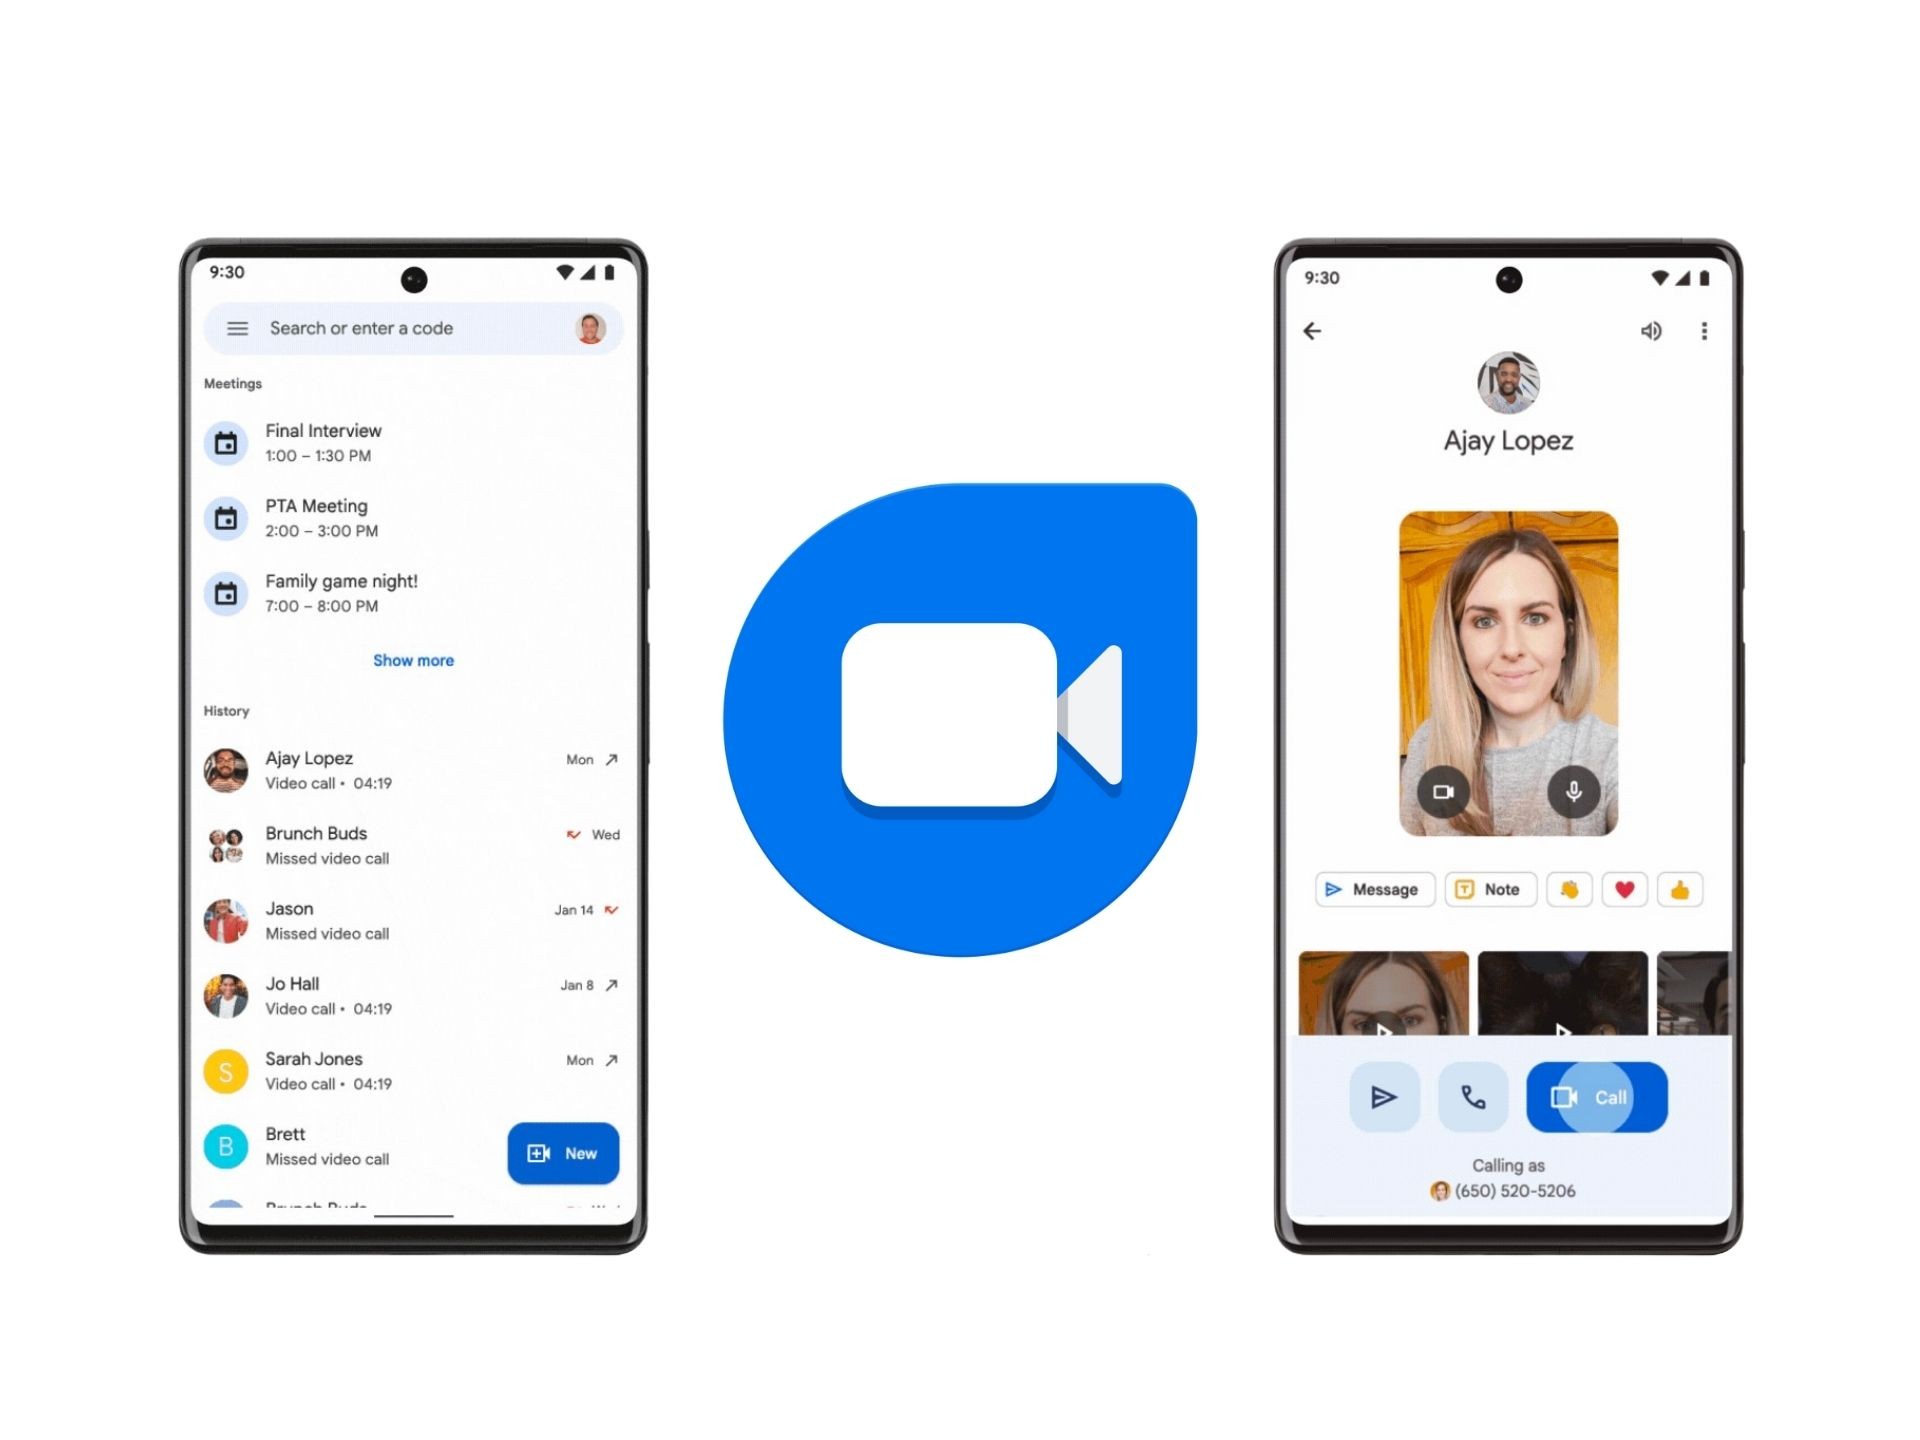 Google is upgrading Duo instead of shutting it down: What is going on?